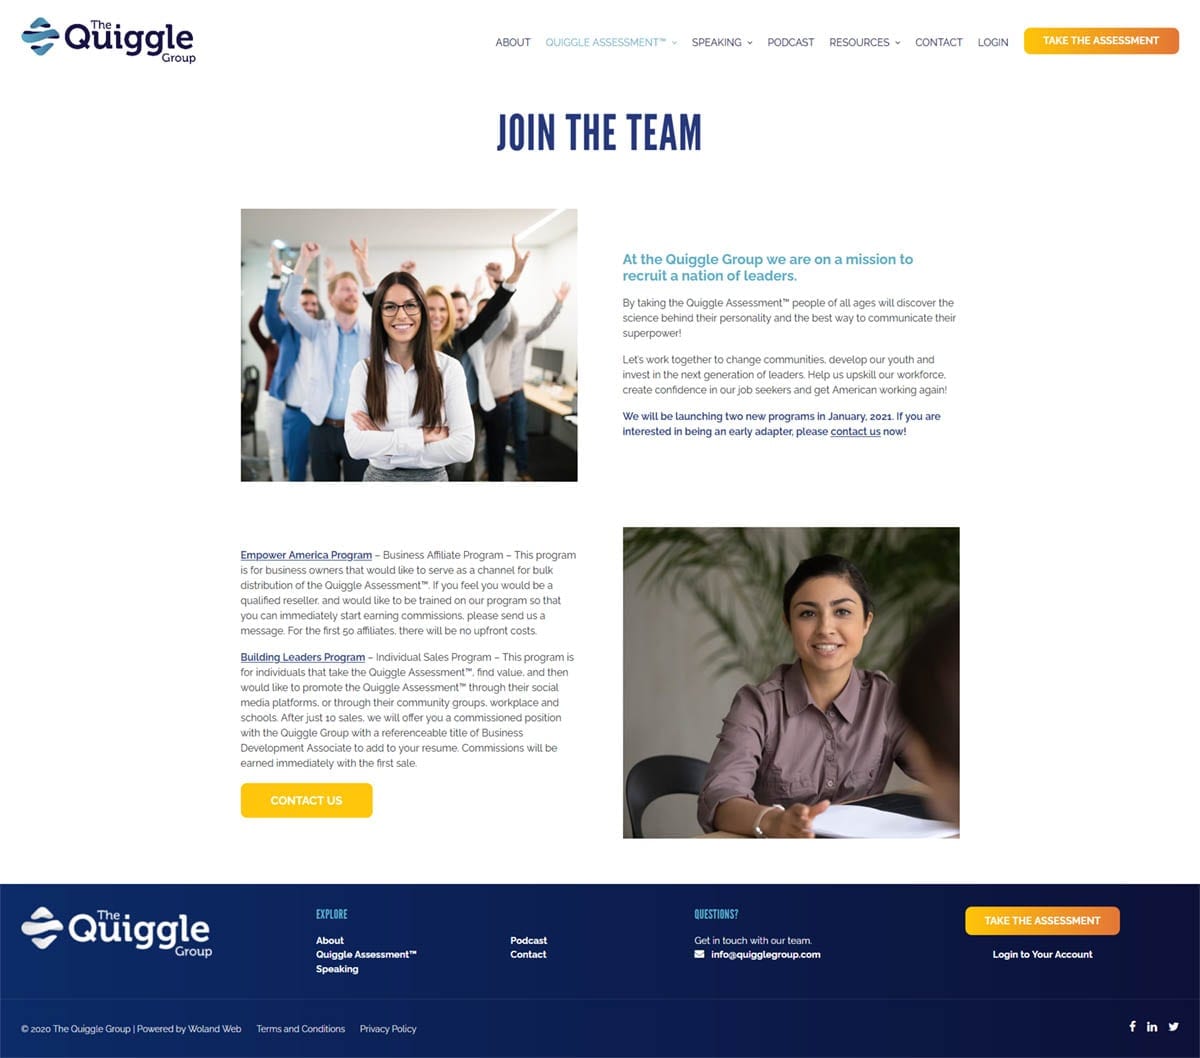 The Quiggle Group website join the team page screenshot